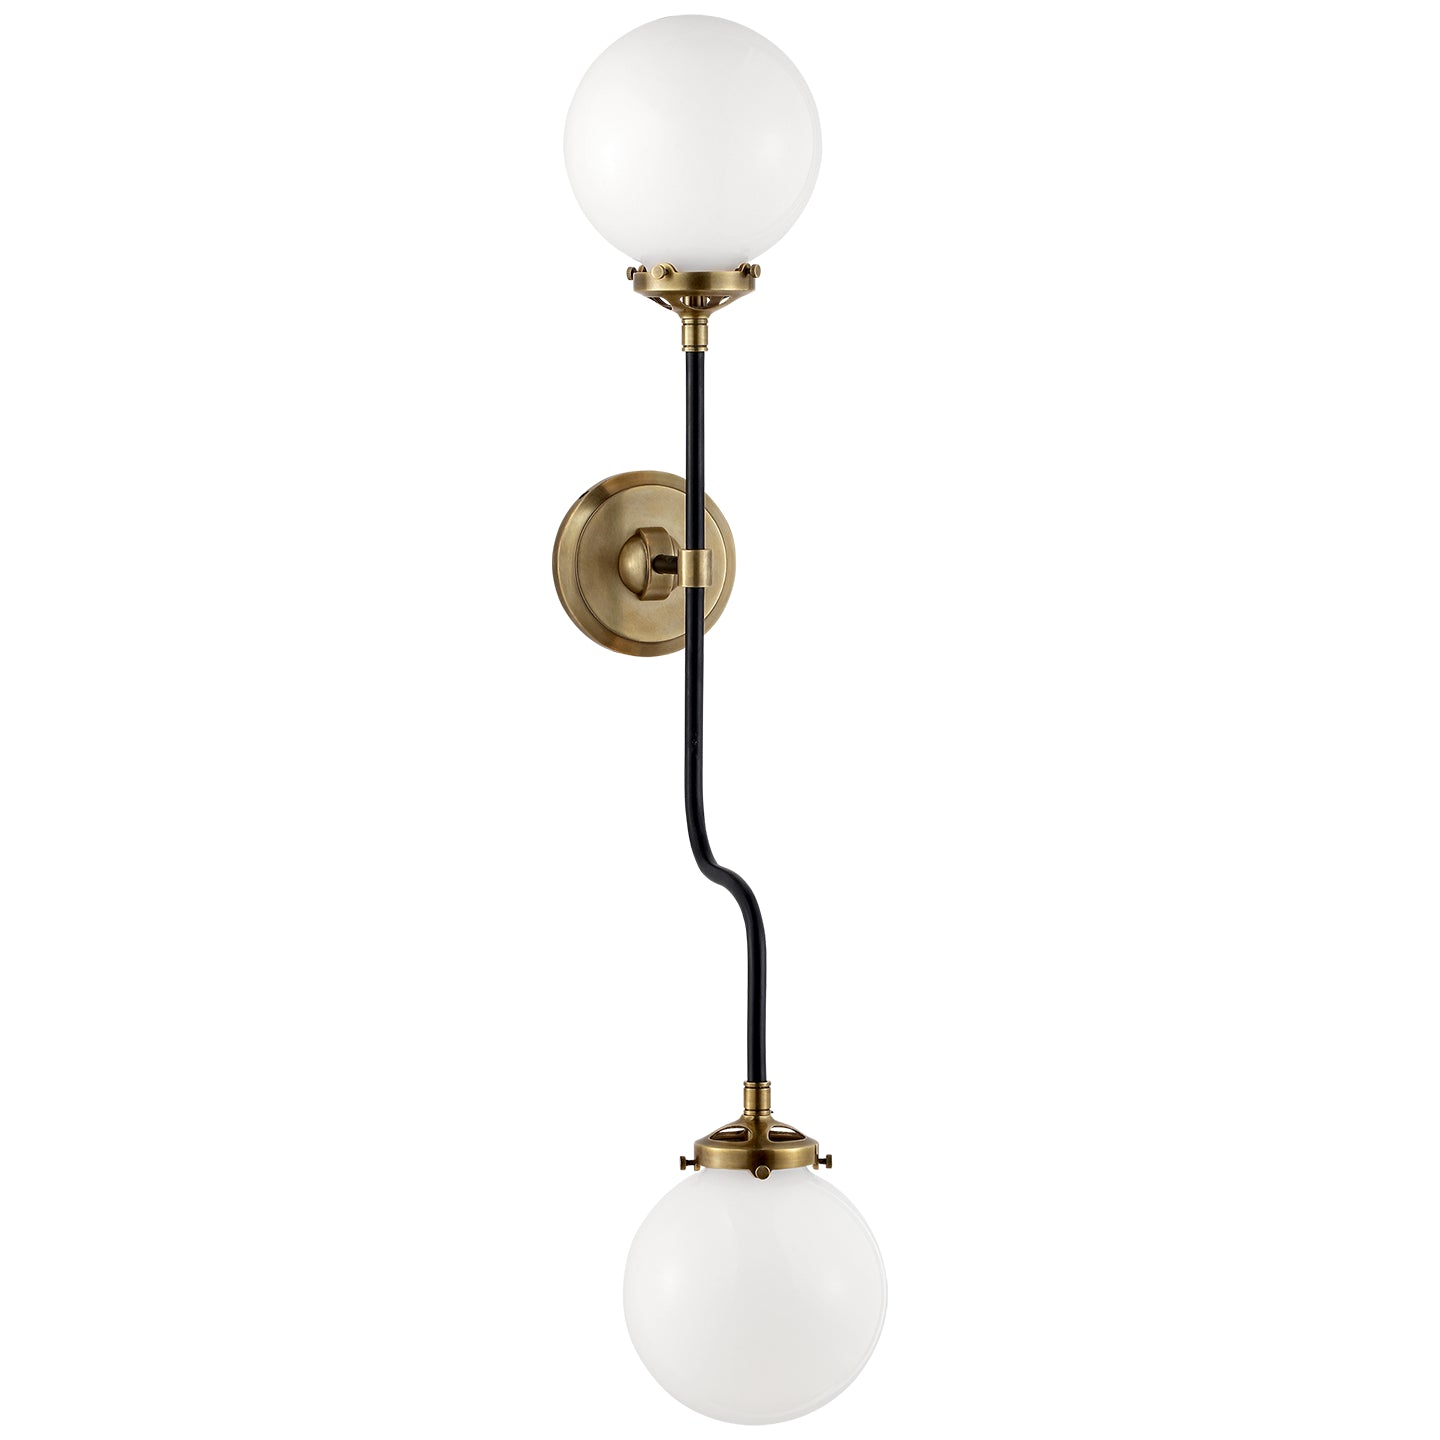 Visual Comfort Signature - S 2022HAB-WG - Two Light Wall Sconce - bistro - Hand-Rubbed Antique Brass